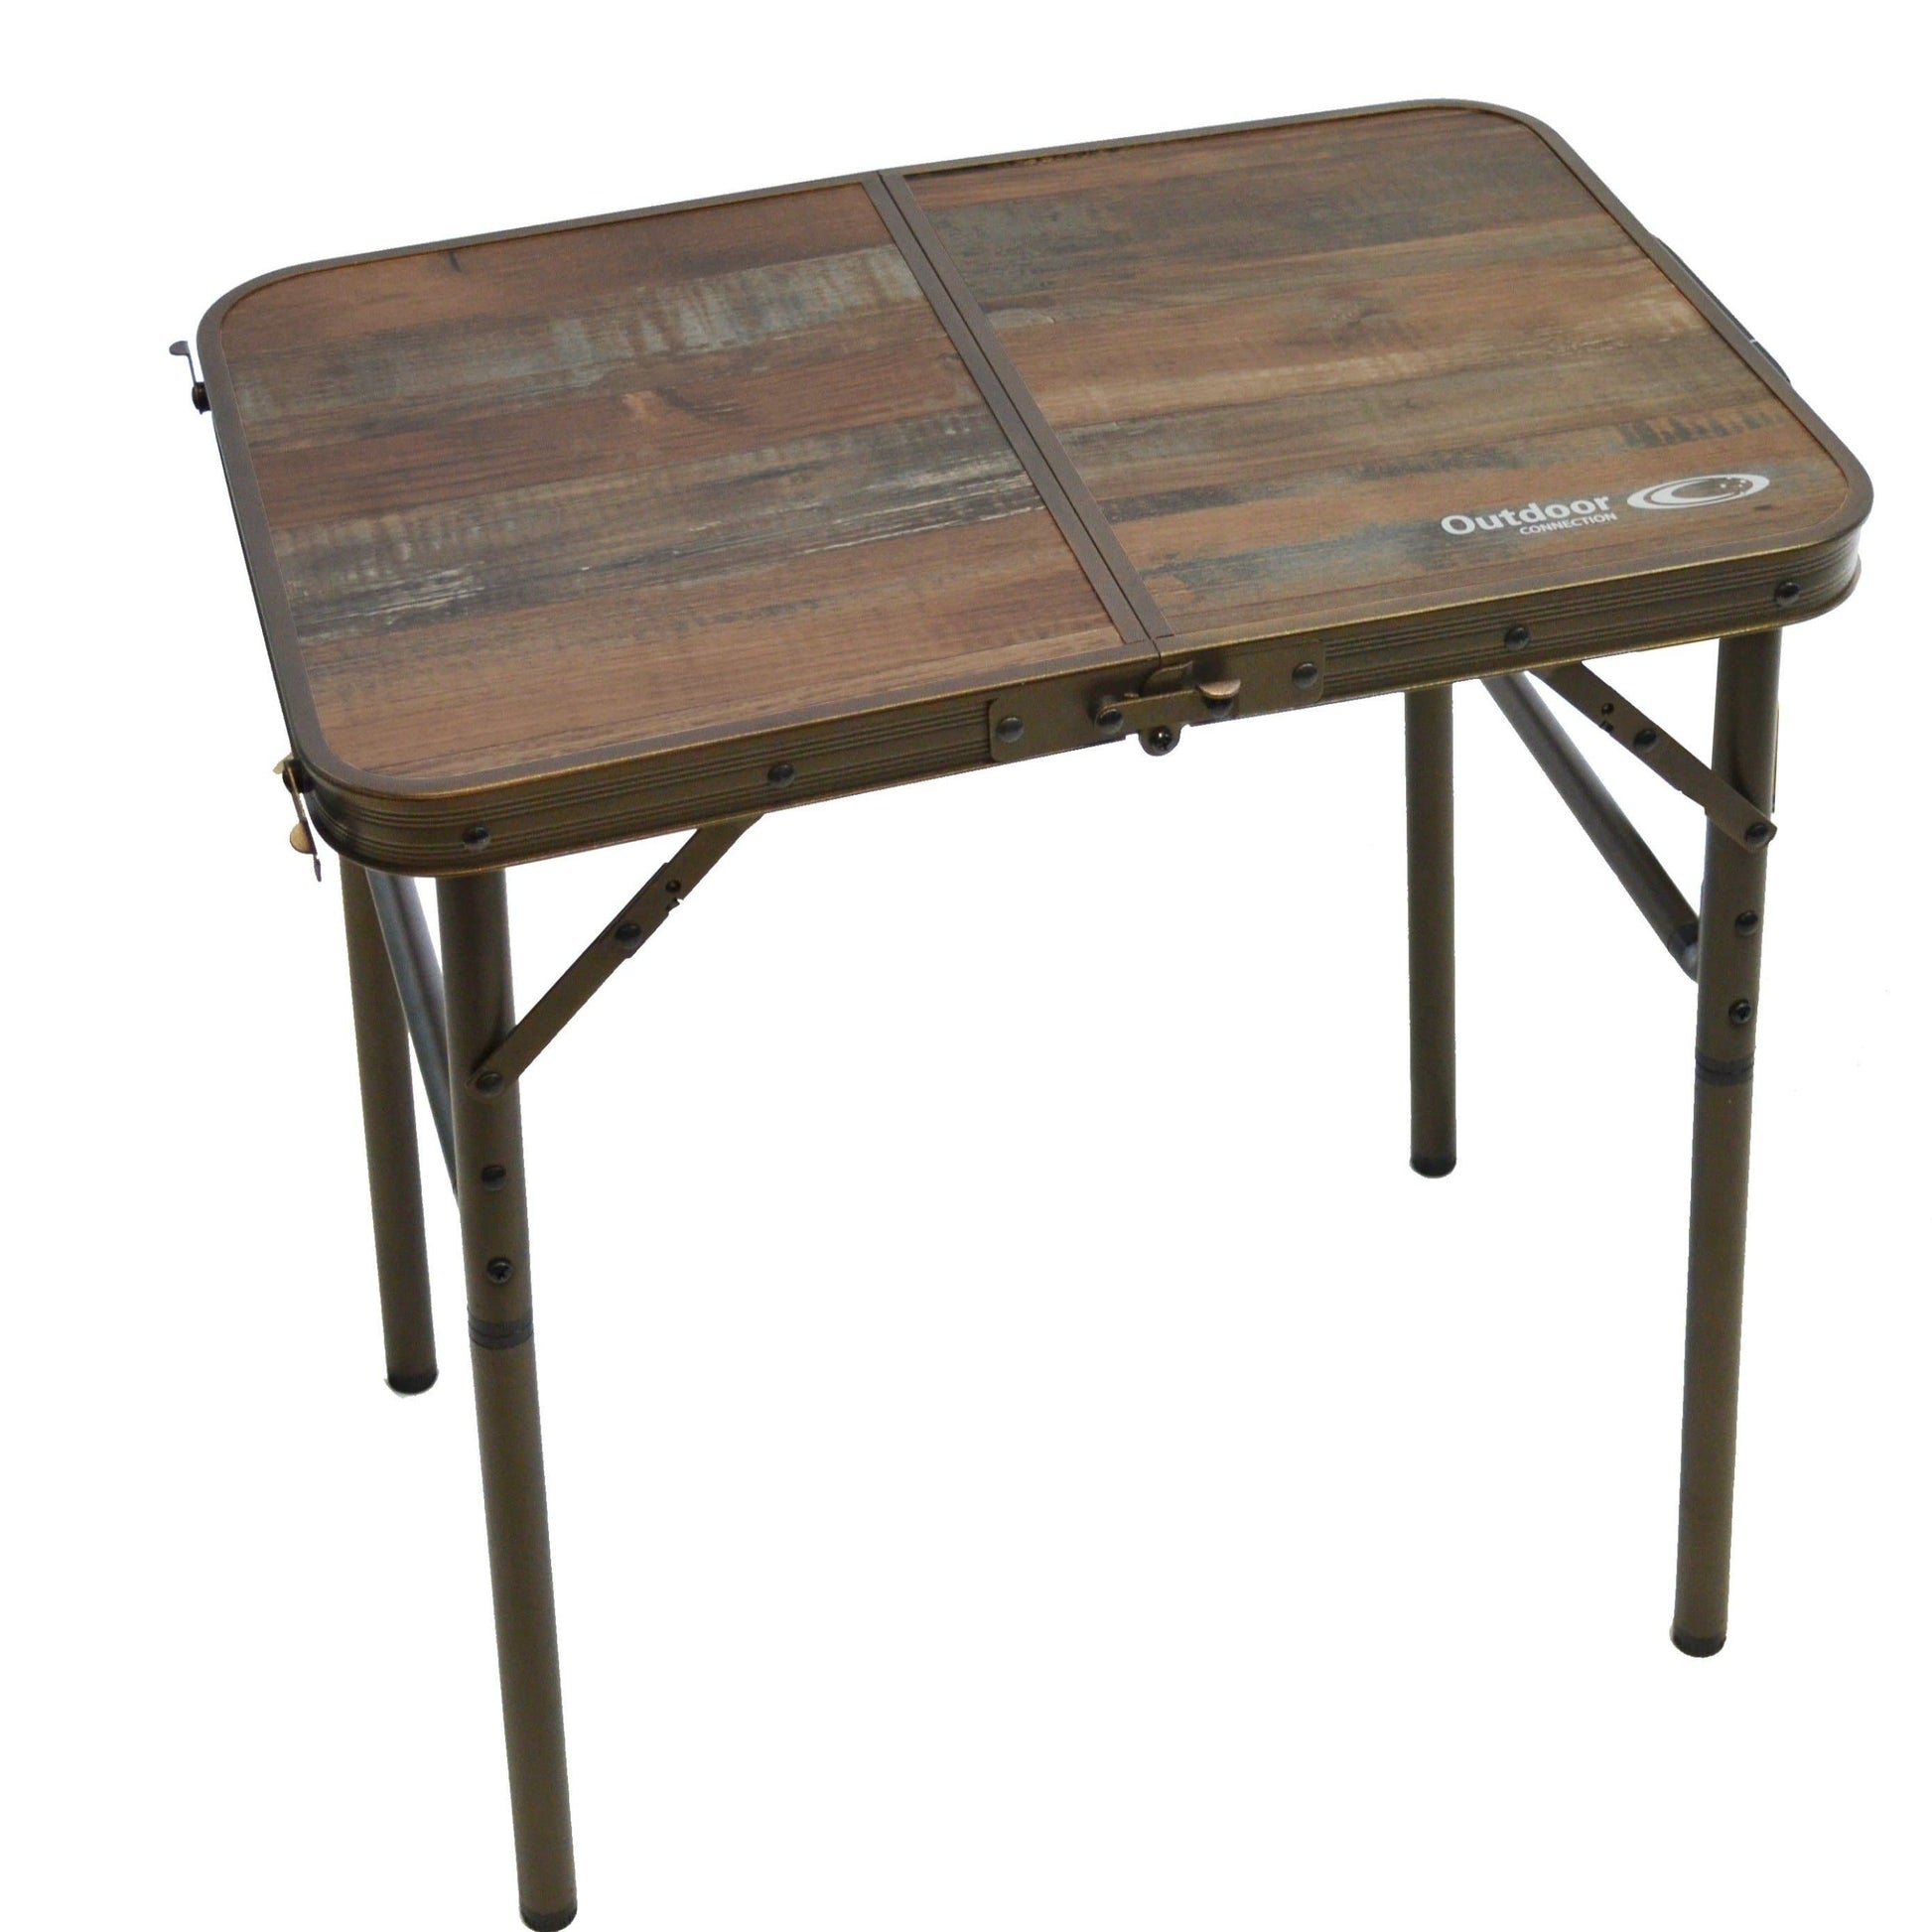 Outdoor Connection Rustic Compact Side Table